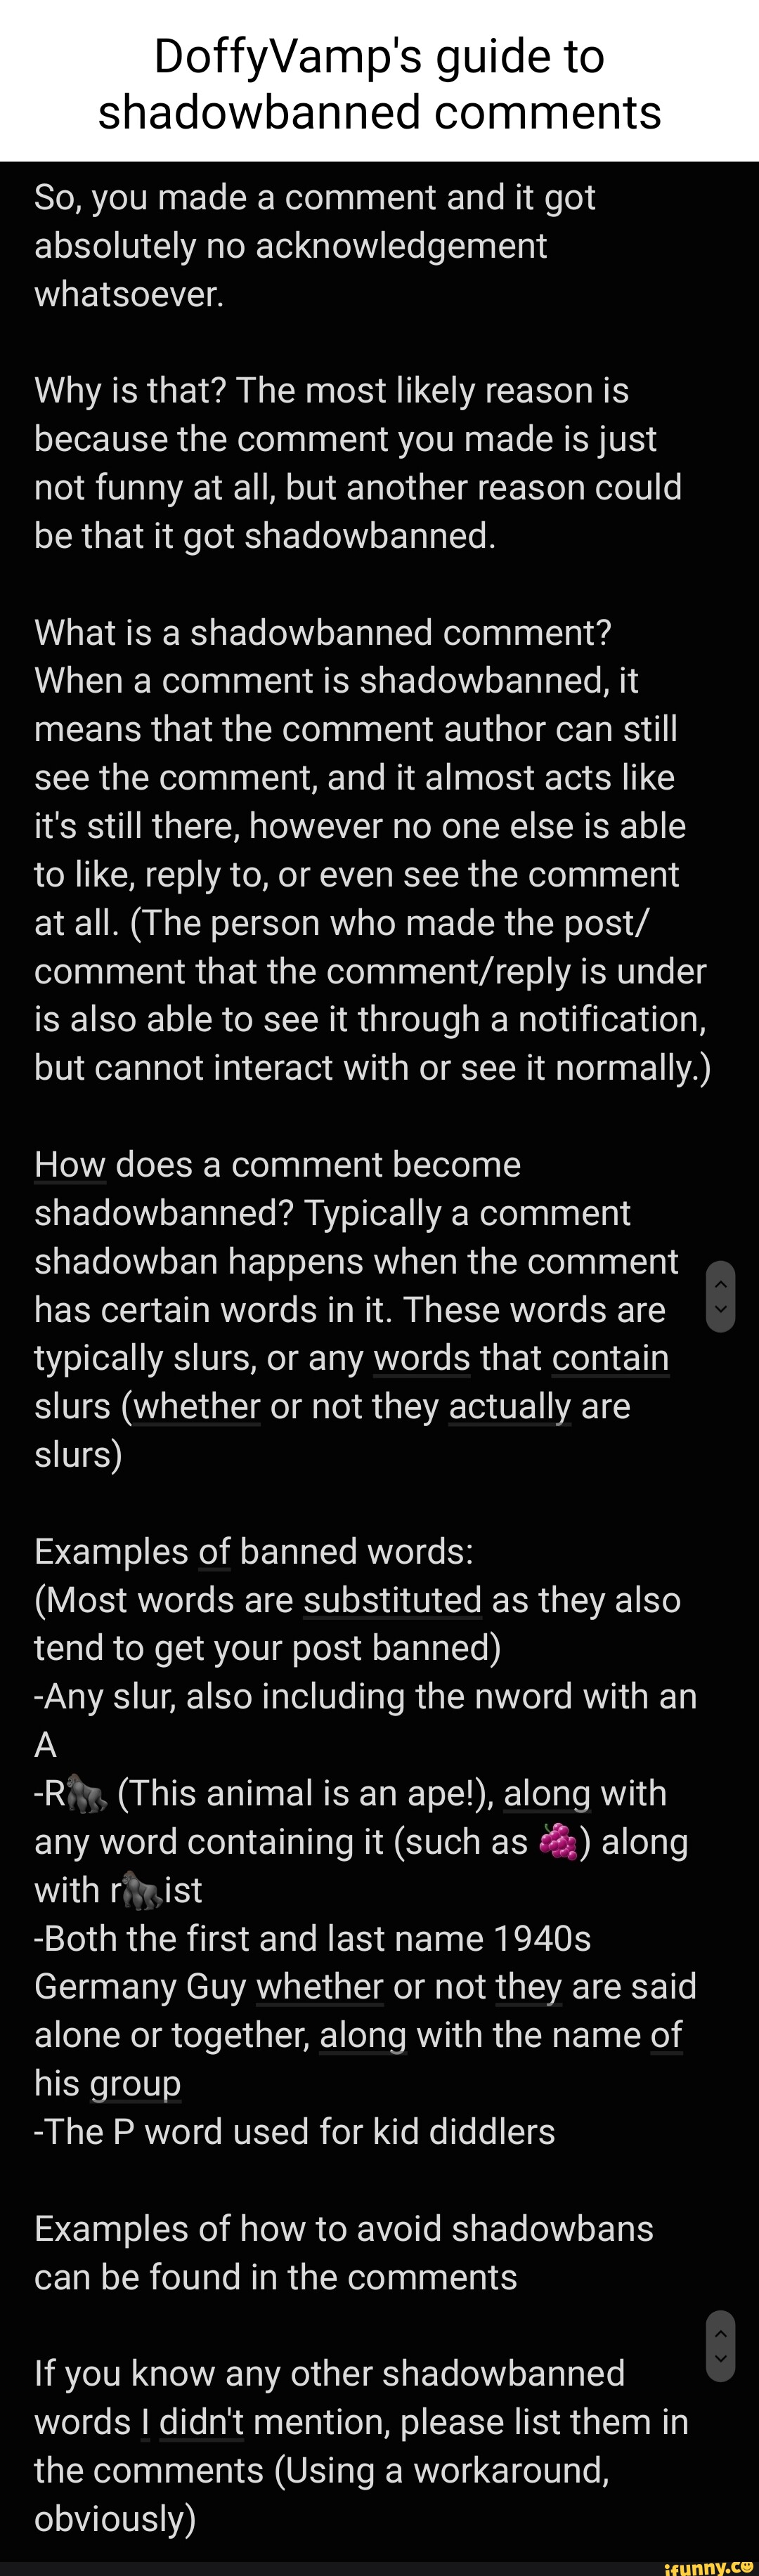 DoffyVamp's guide to shadowbanned comments So, you made a comment and it  got absolutely no acknowledgement